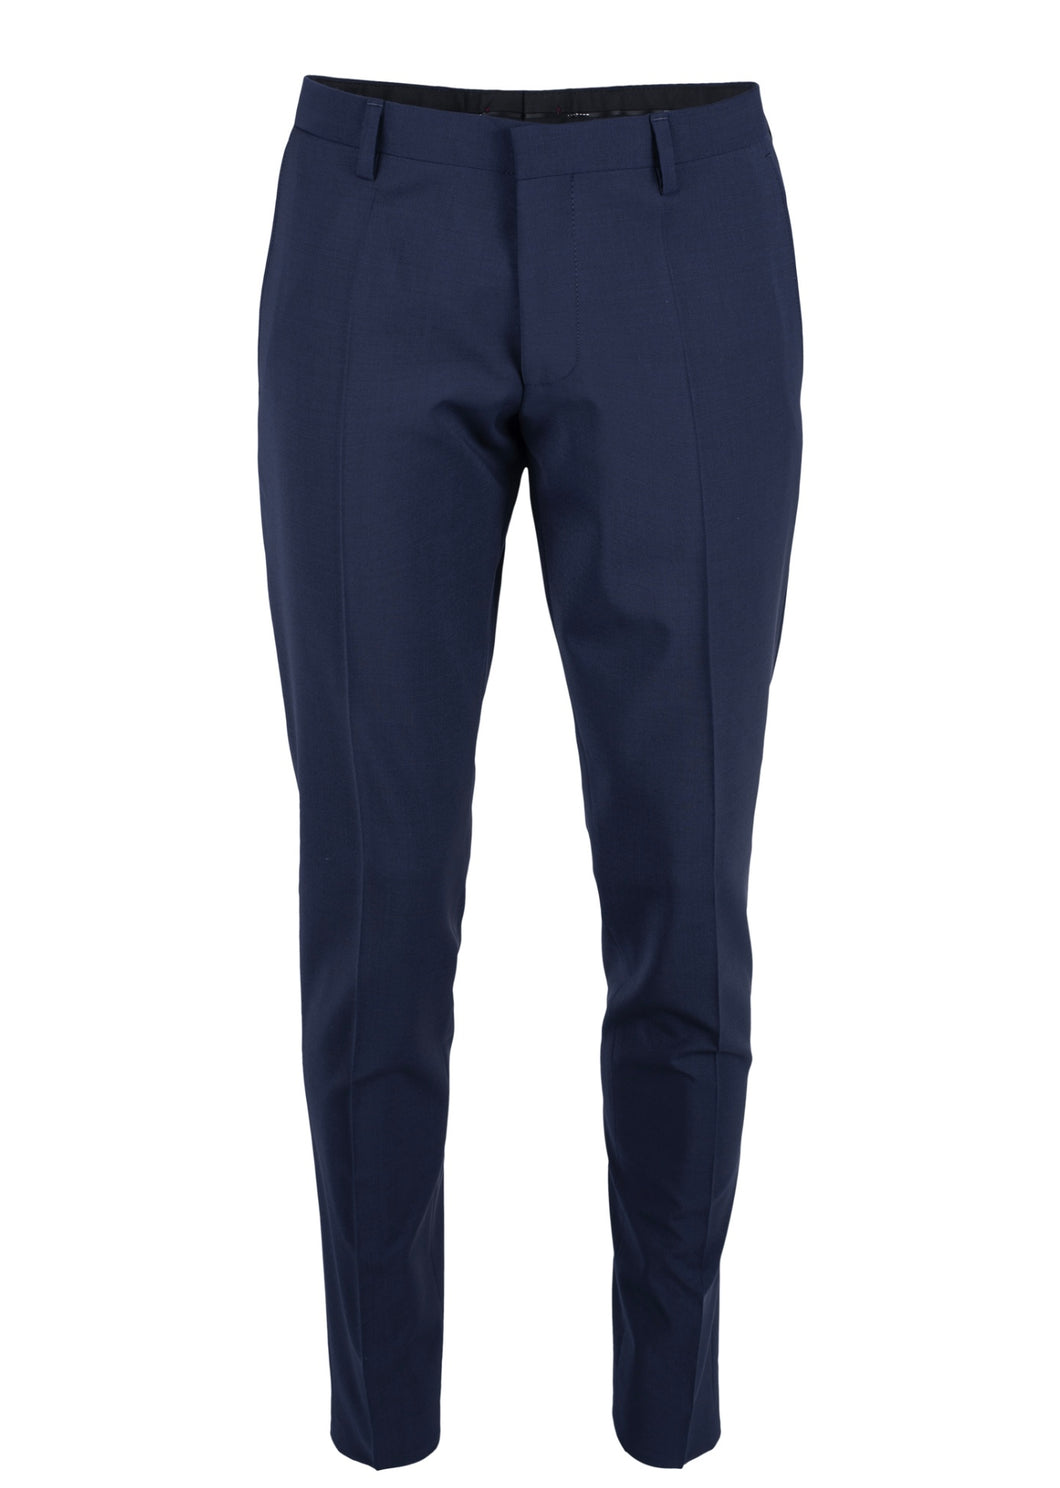 ROY ROBSON Extra Slim Freestyle Navy Suit Trousers 5046 A401 1002140